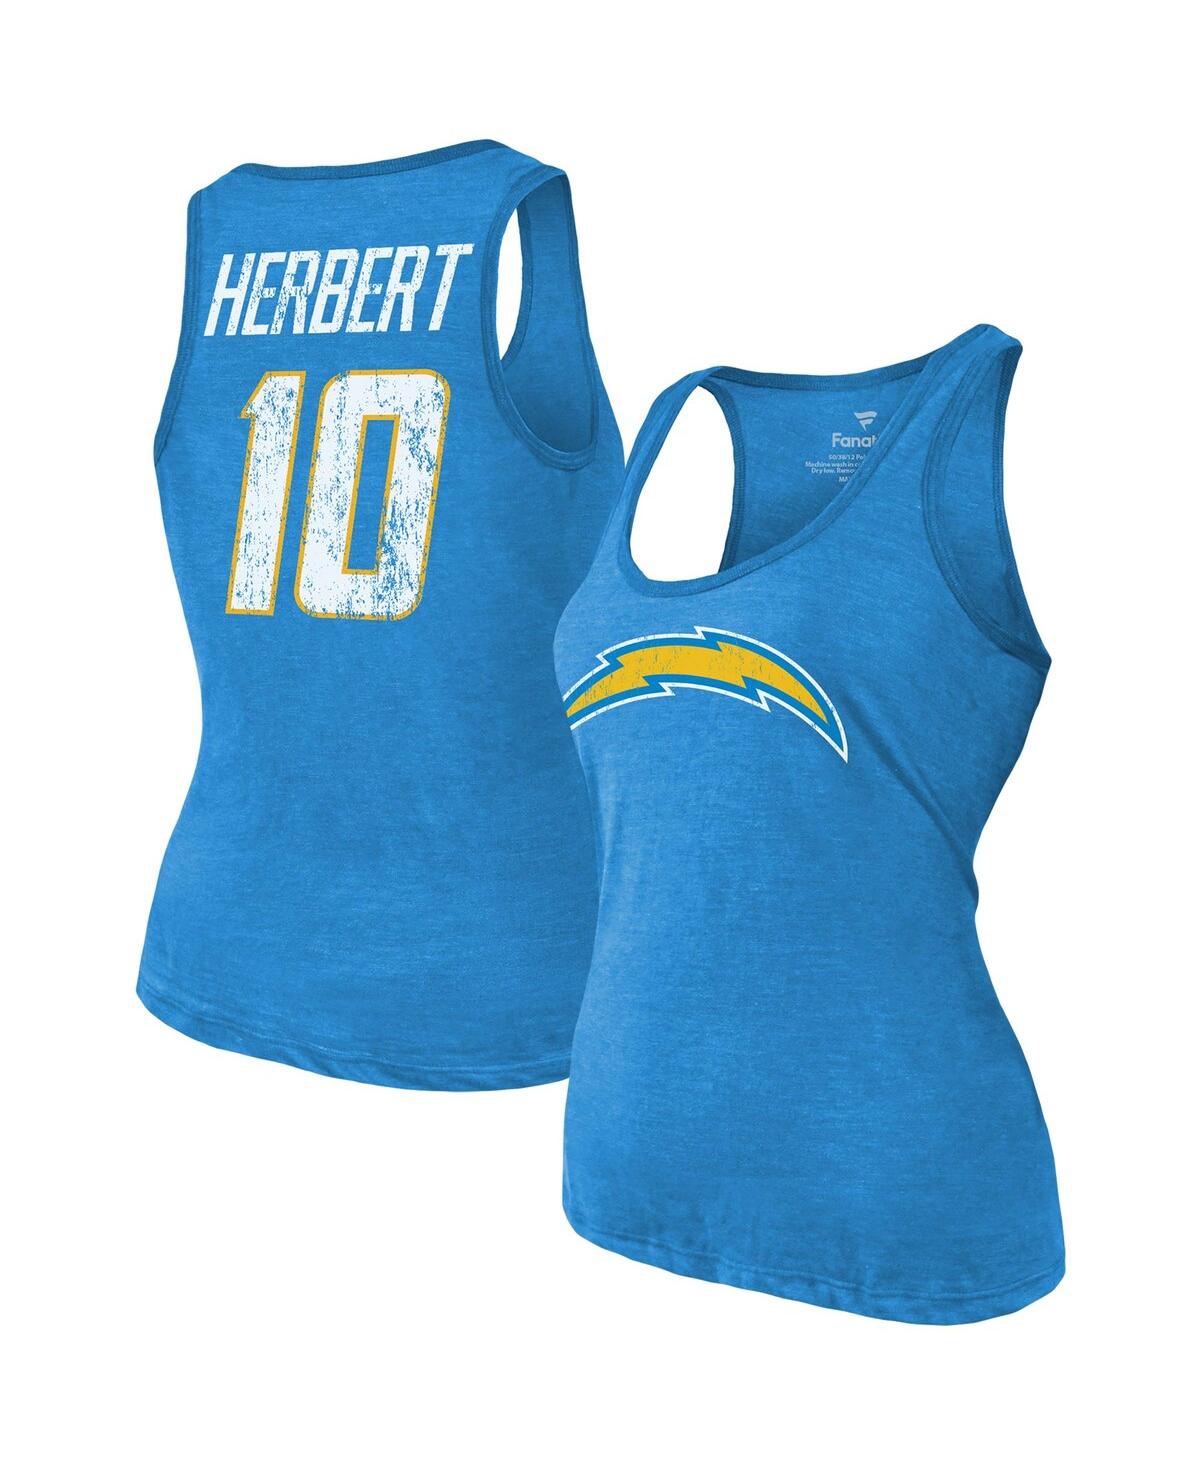 Women's Majestic Threads Justin Herbert Heathered Powder Blue Los Angeles Chargers Name & Number Tri-Blend Tank Top - Powder Blue